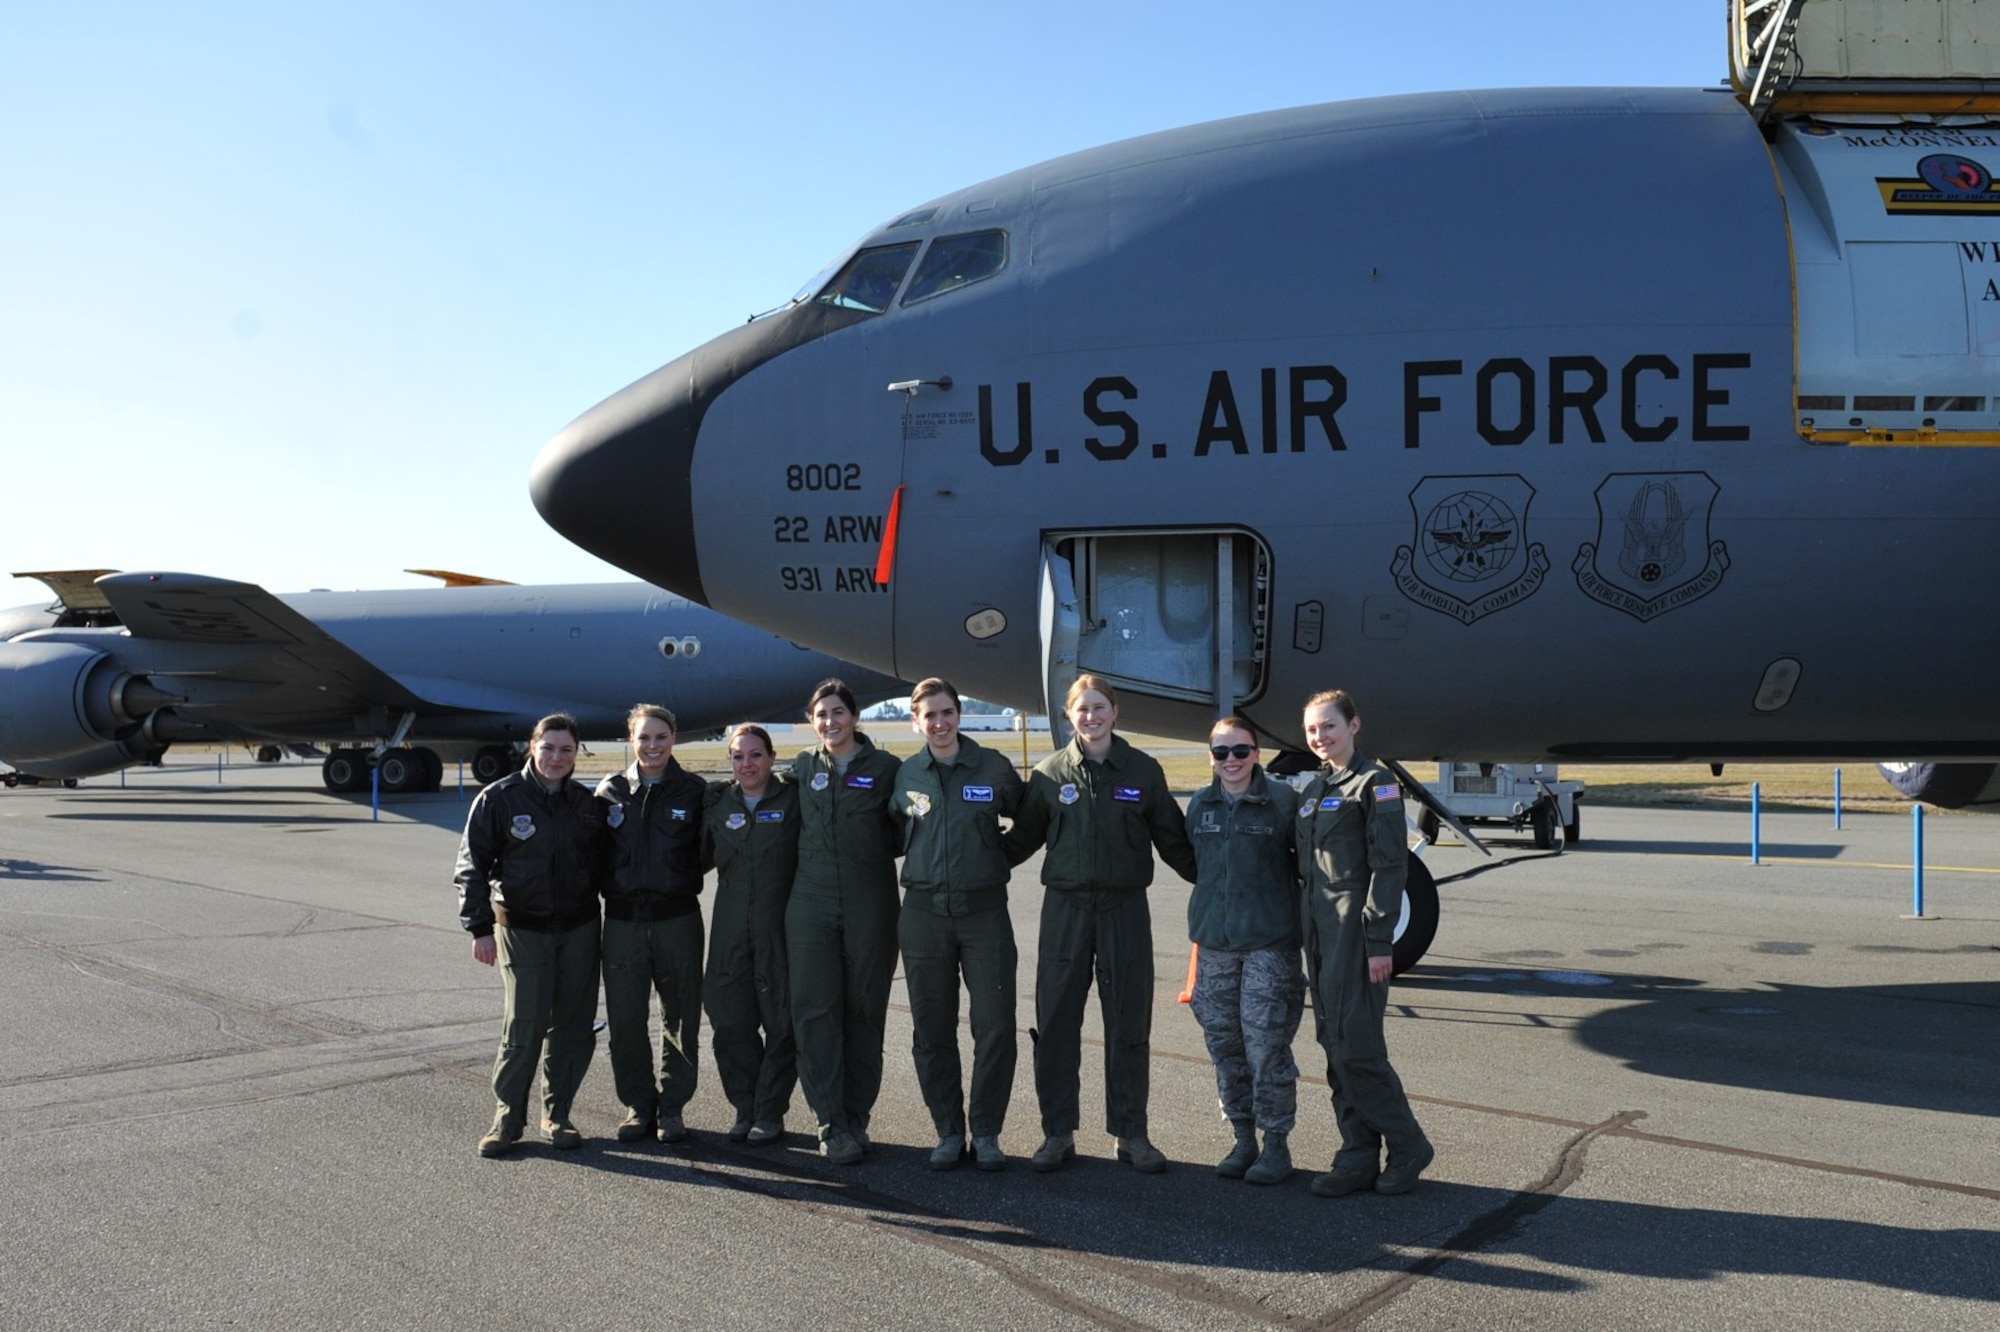 The all-female crew poses by the static display prior to the Girls Fly Too event March 11-12, at Abbotsford International Airport, Abbotsford, British Columbia, Canada. While there were many participants at the air show, the 22nd Air Refueling Wing was the only display with an all-female crew.